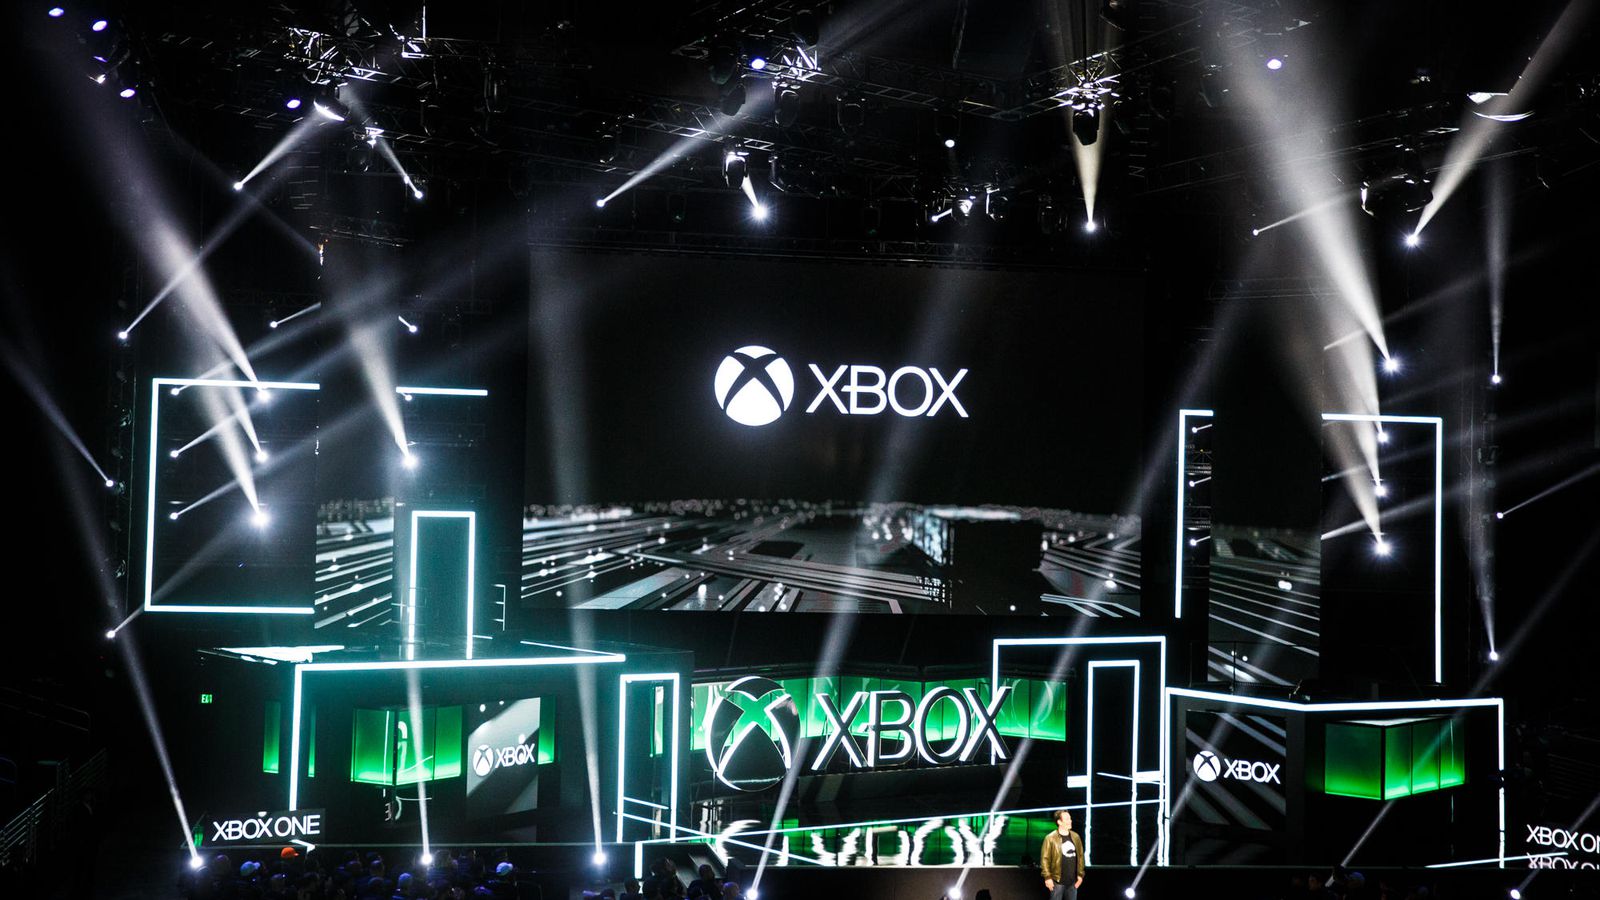 Xbox Series X will be Launched at E3 2020 Gaming Event